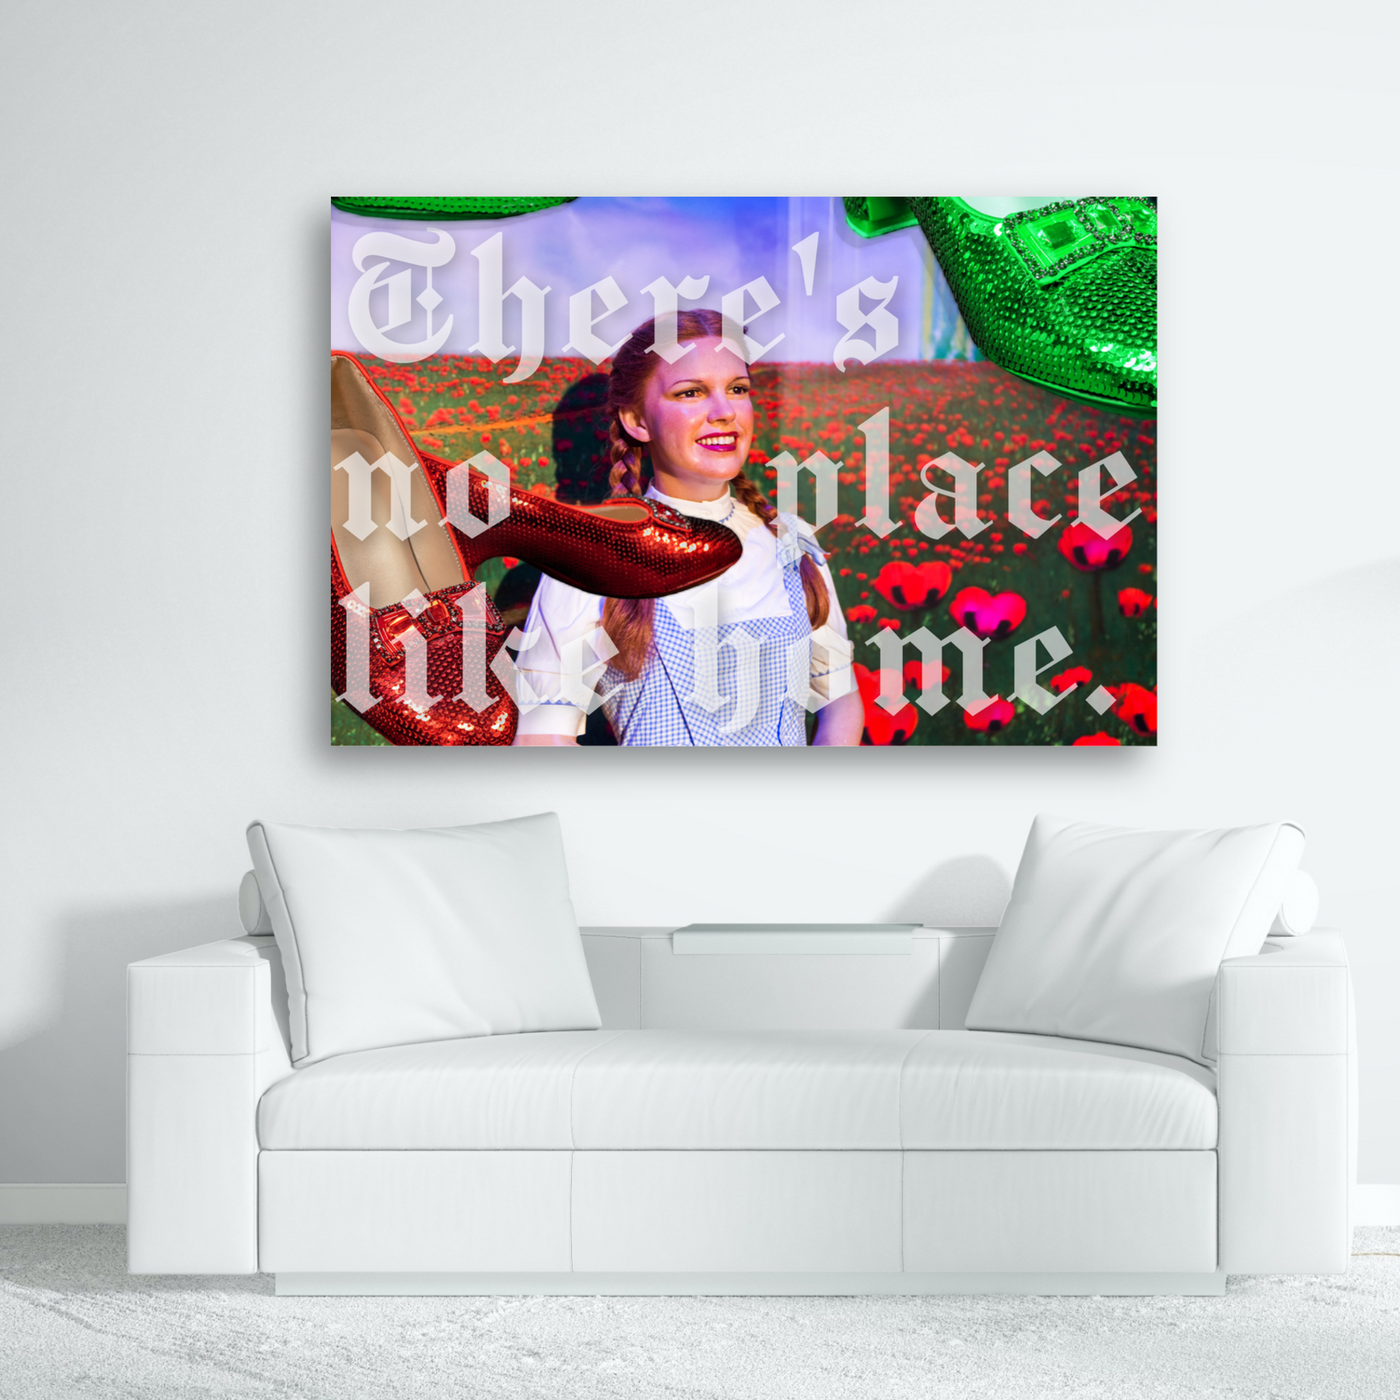 There's No Place Like Home Wall Art